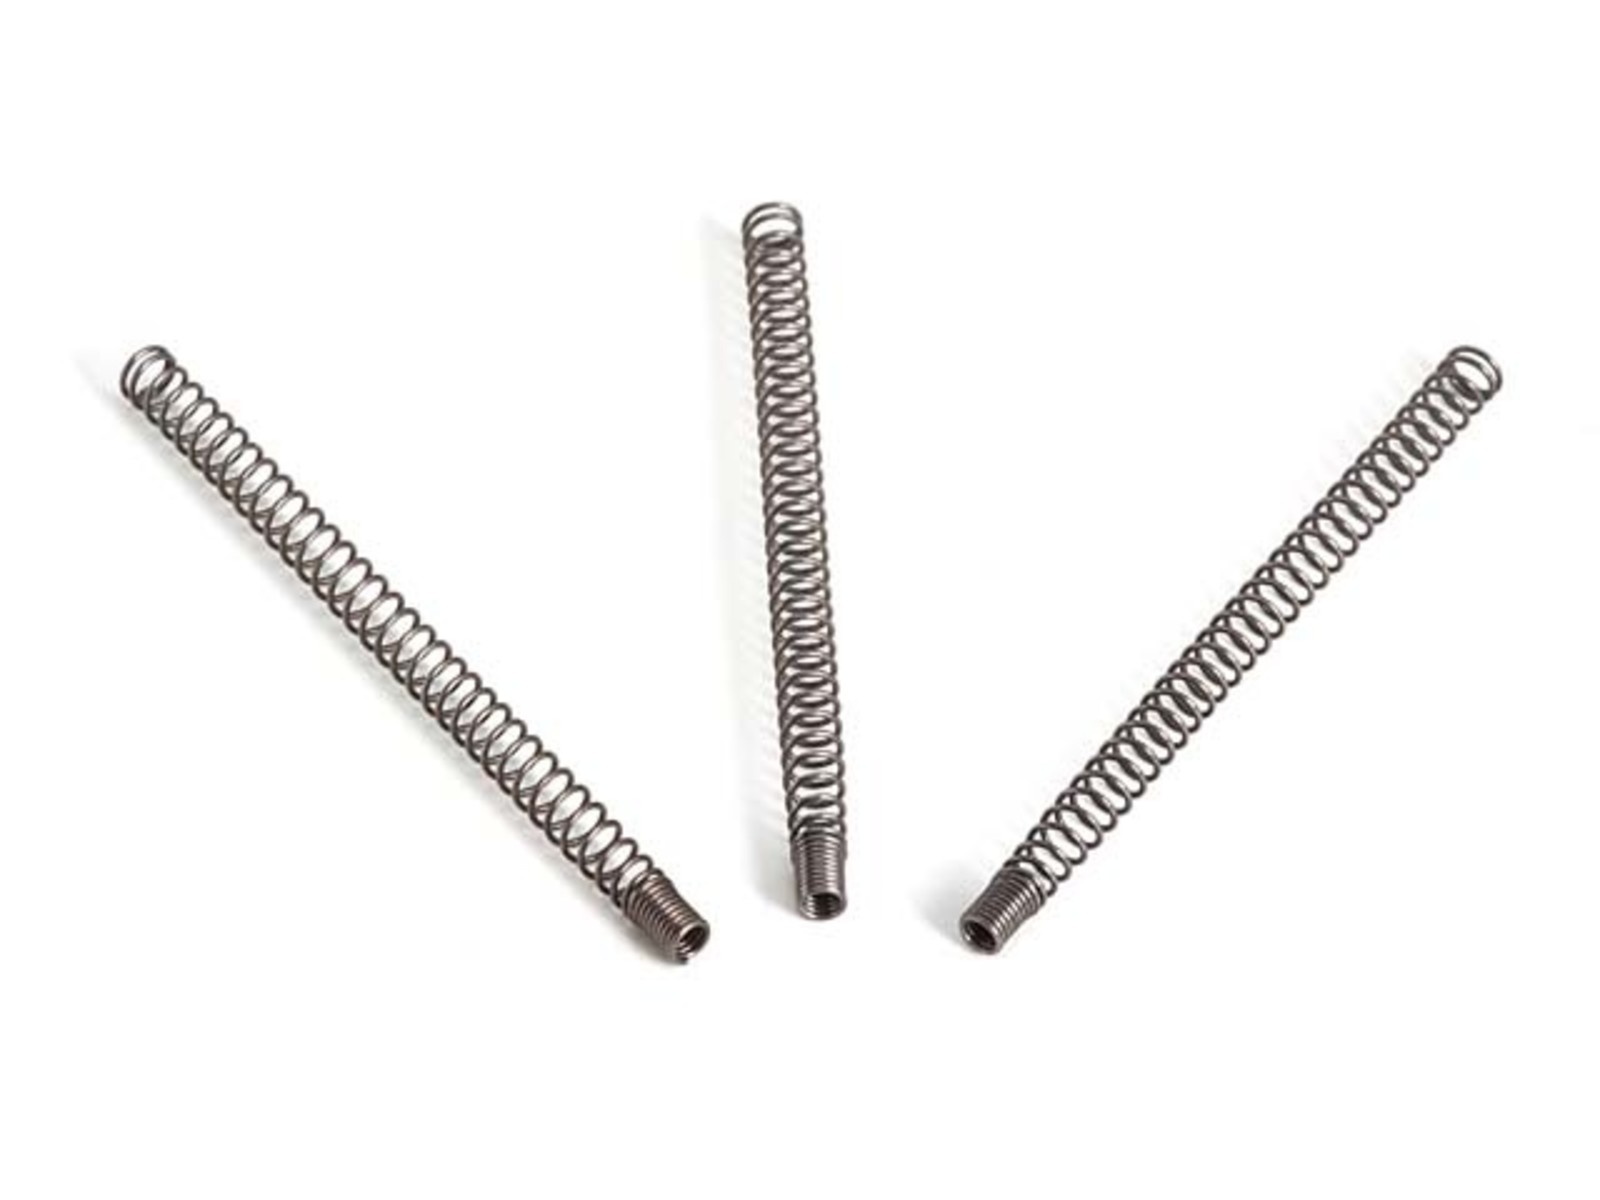 AIP AIP 120% Loading Nozzle Spring For Marui 5.1/ 4.3/1911